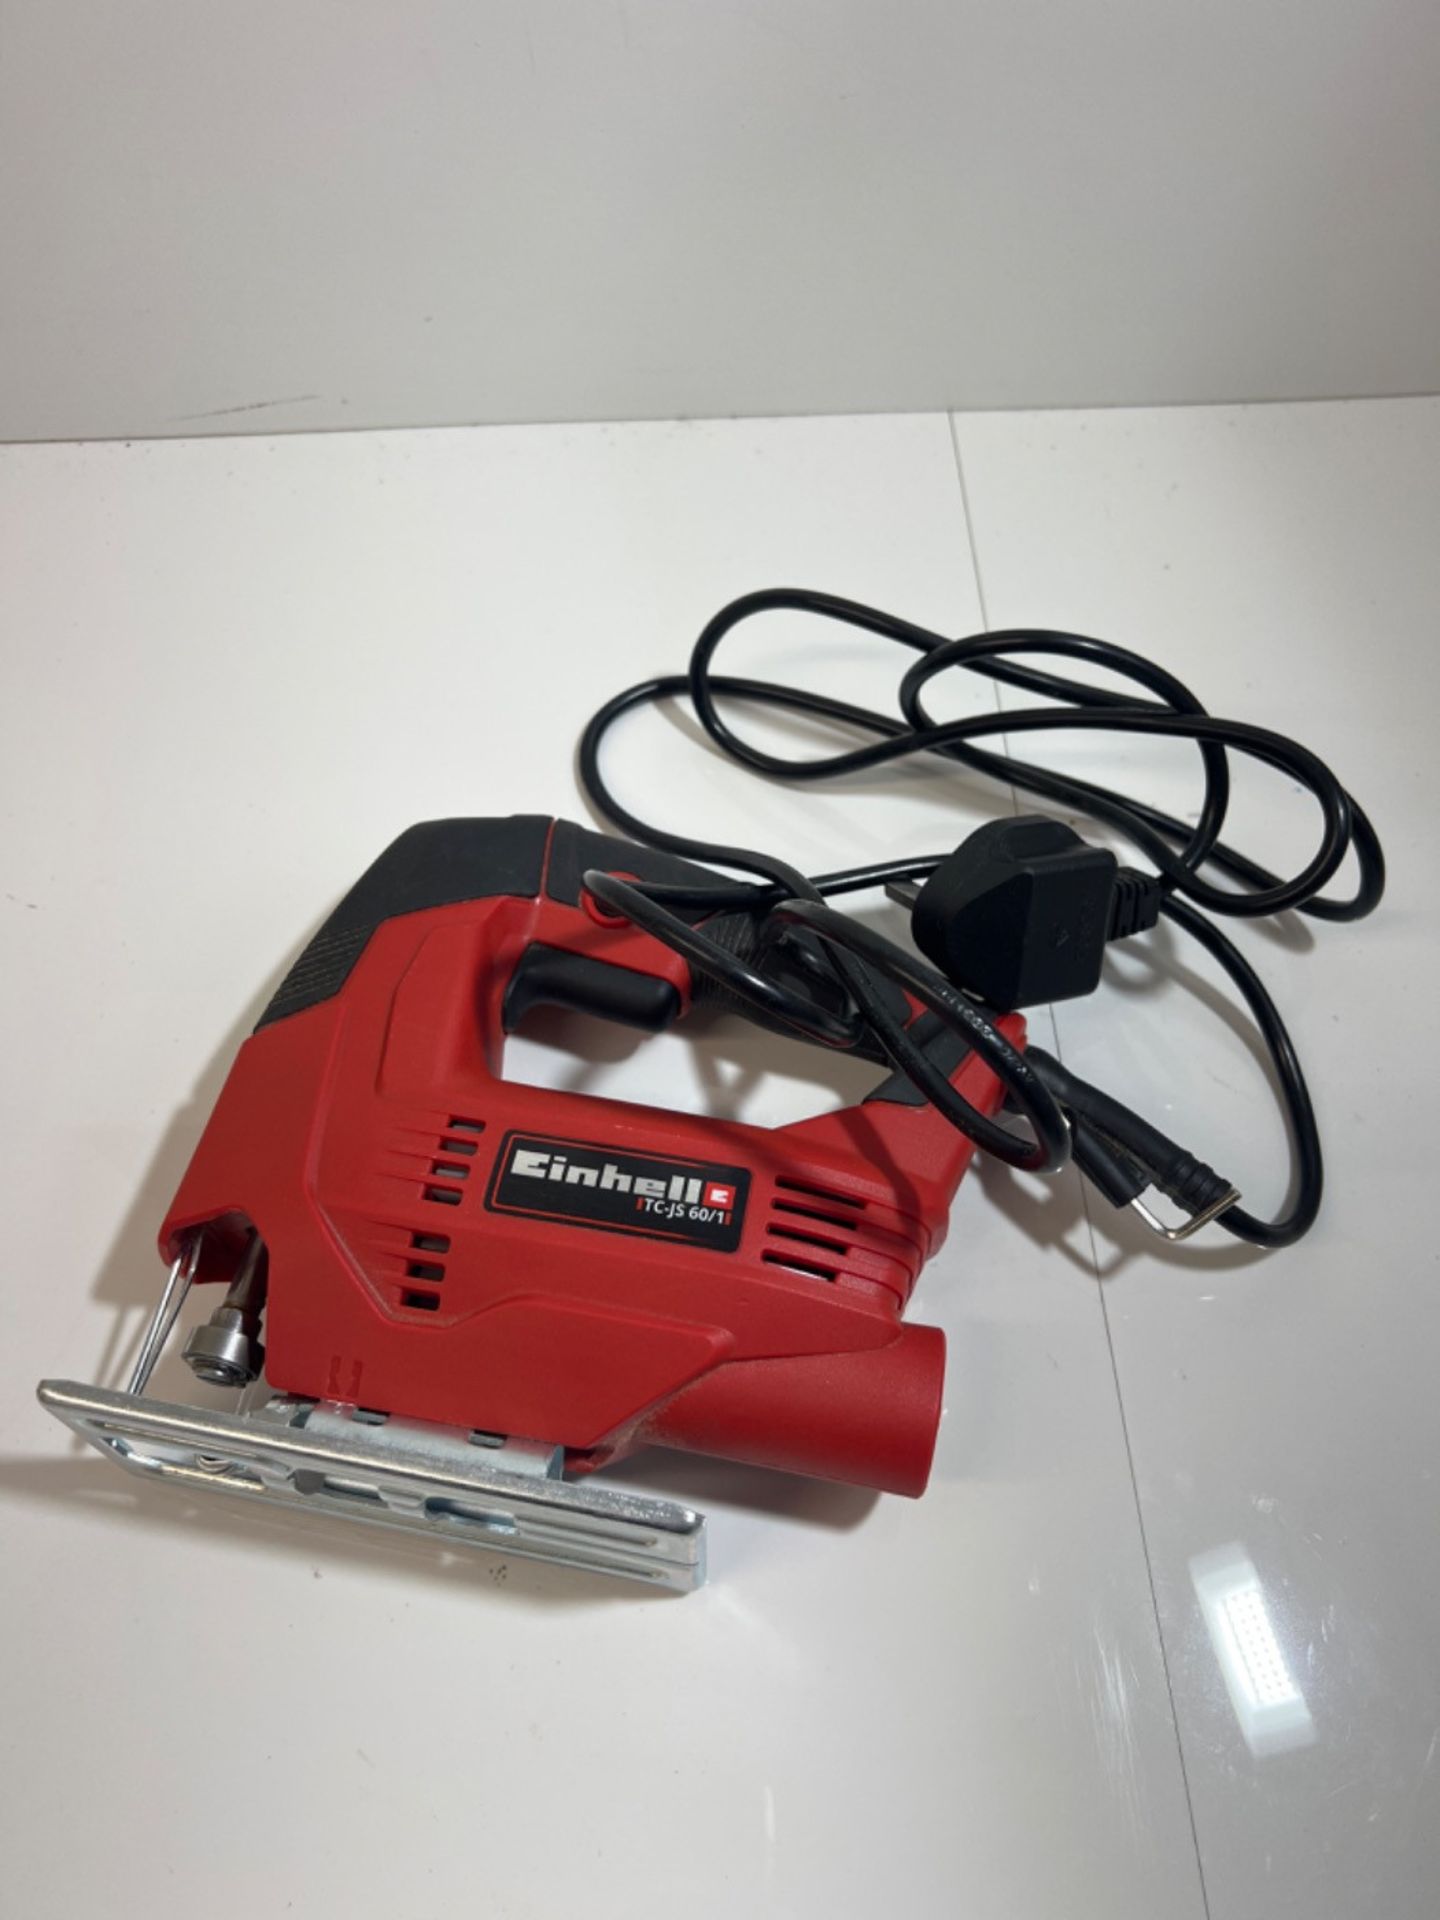 Einhell TC-JS 60/1 Electric Jigsaw | 60mm Cutting Depth, Swivel Soleplate For 45° Mitre Cuts, Elec - Image 3 of 3